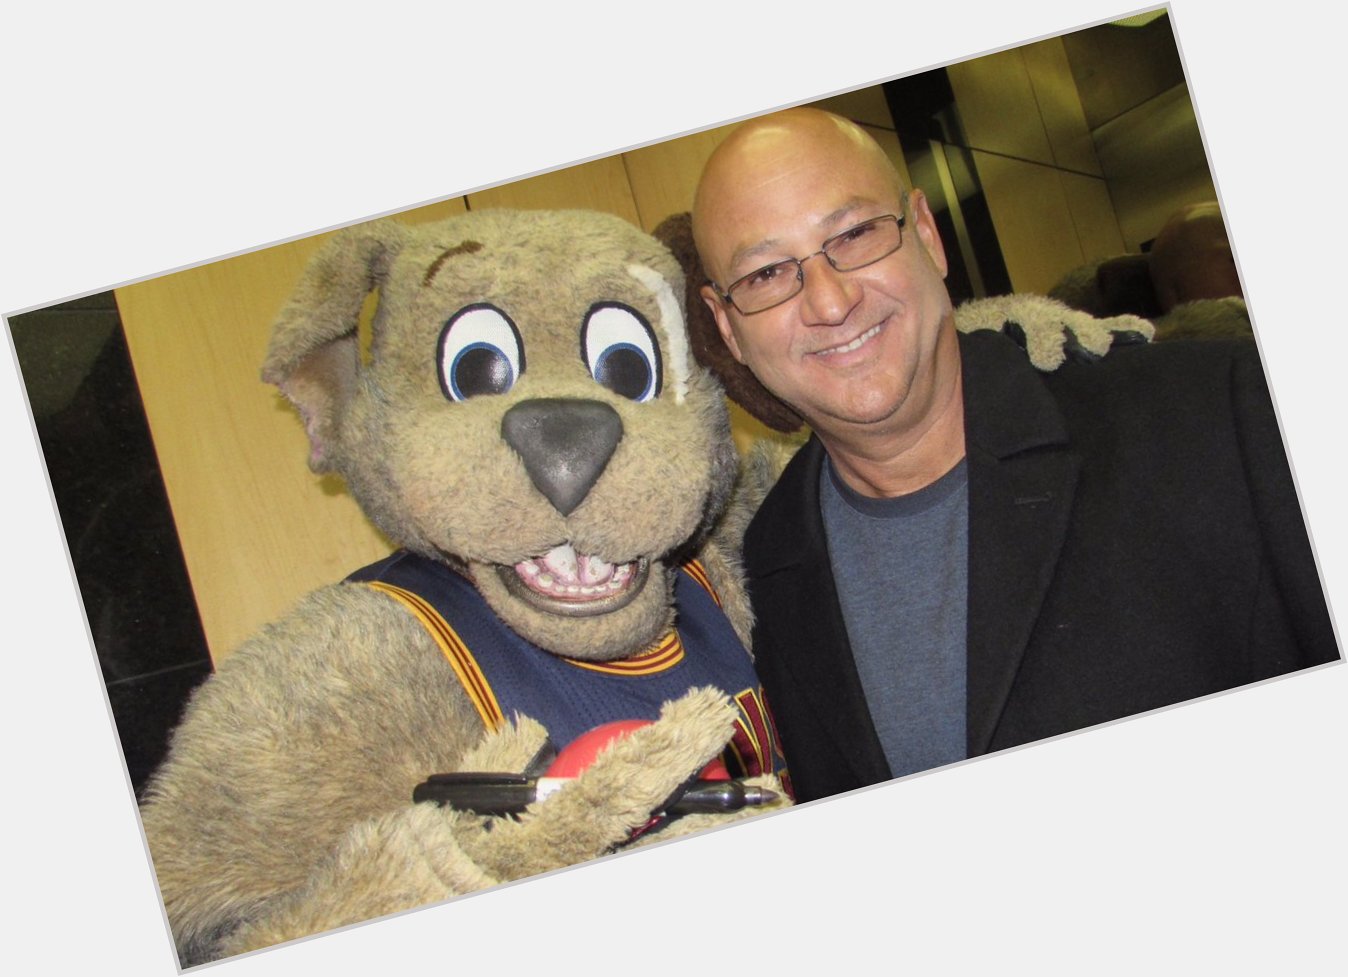 Happy 43rd Birthday to my buddy Terry Francona. Let\s celebrate by beating the White Sox tonight! 